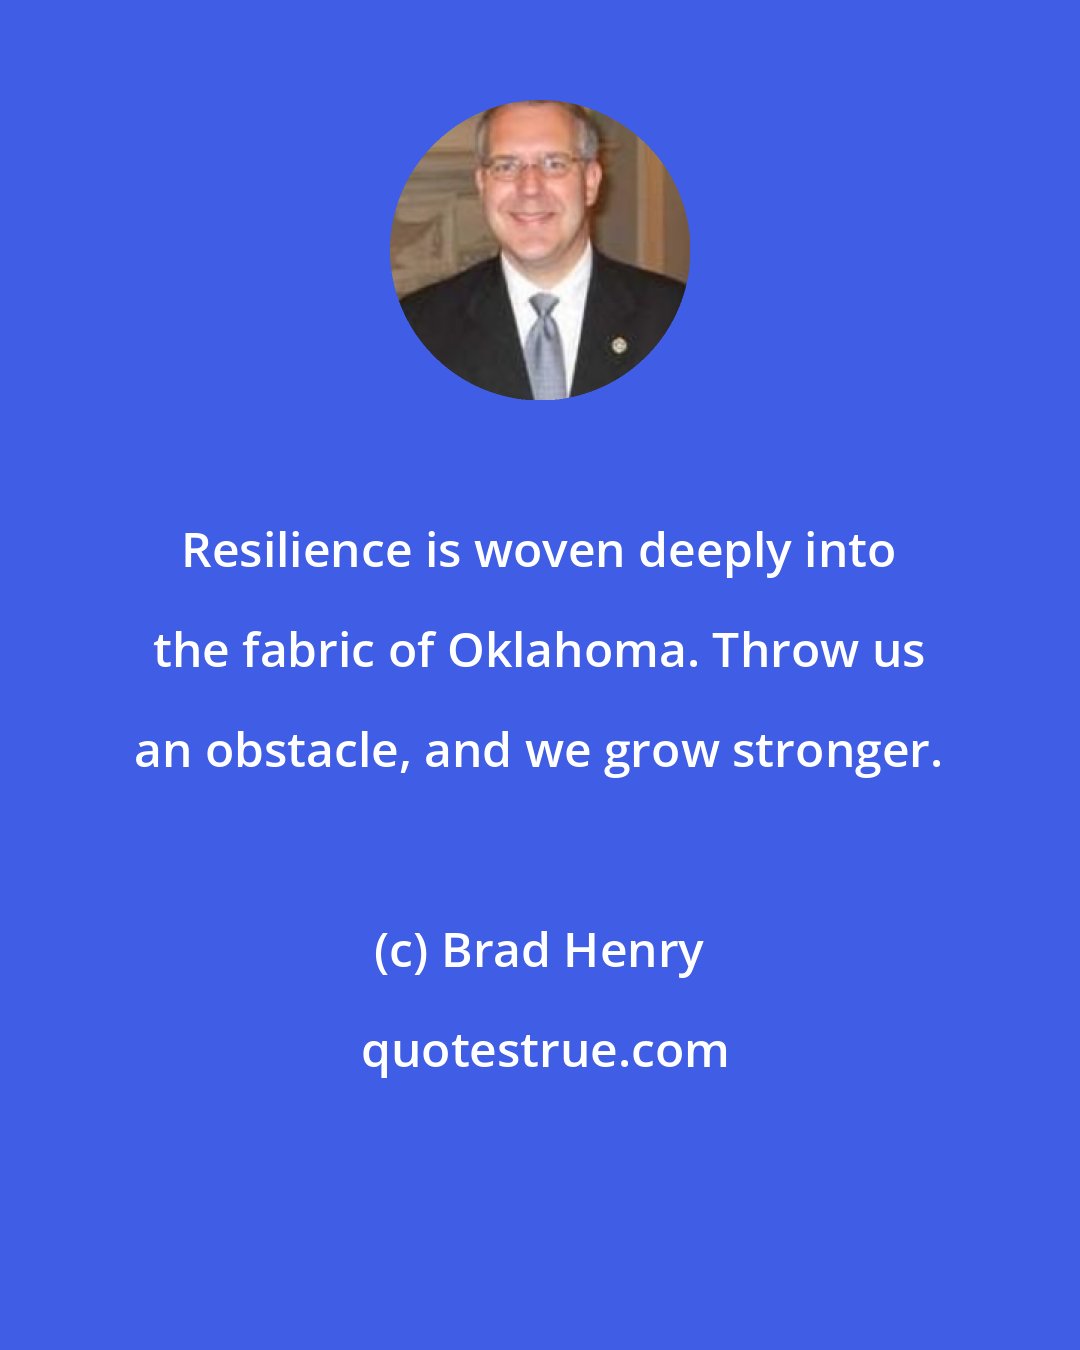 Brad Henry: Resilience is woven deeply into the fabric of Oklahoma. Throw us an obstacle, and we grow stronger.